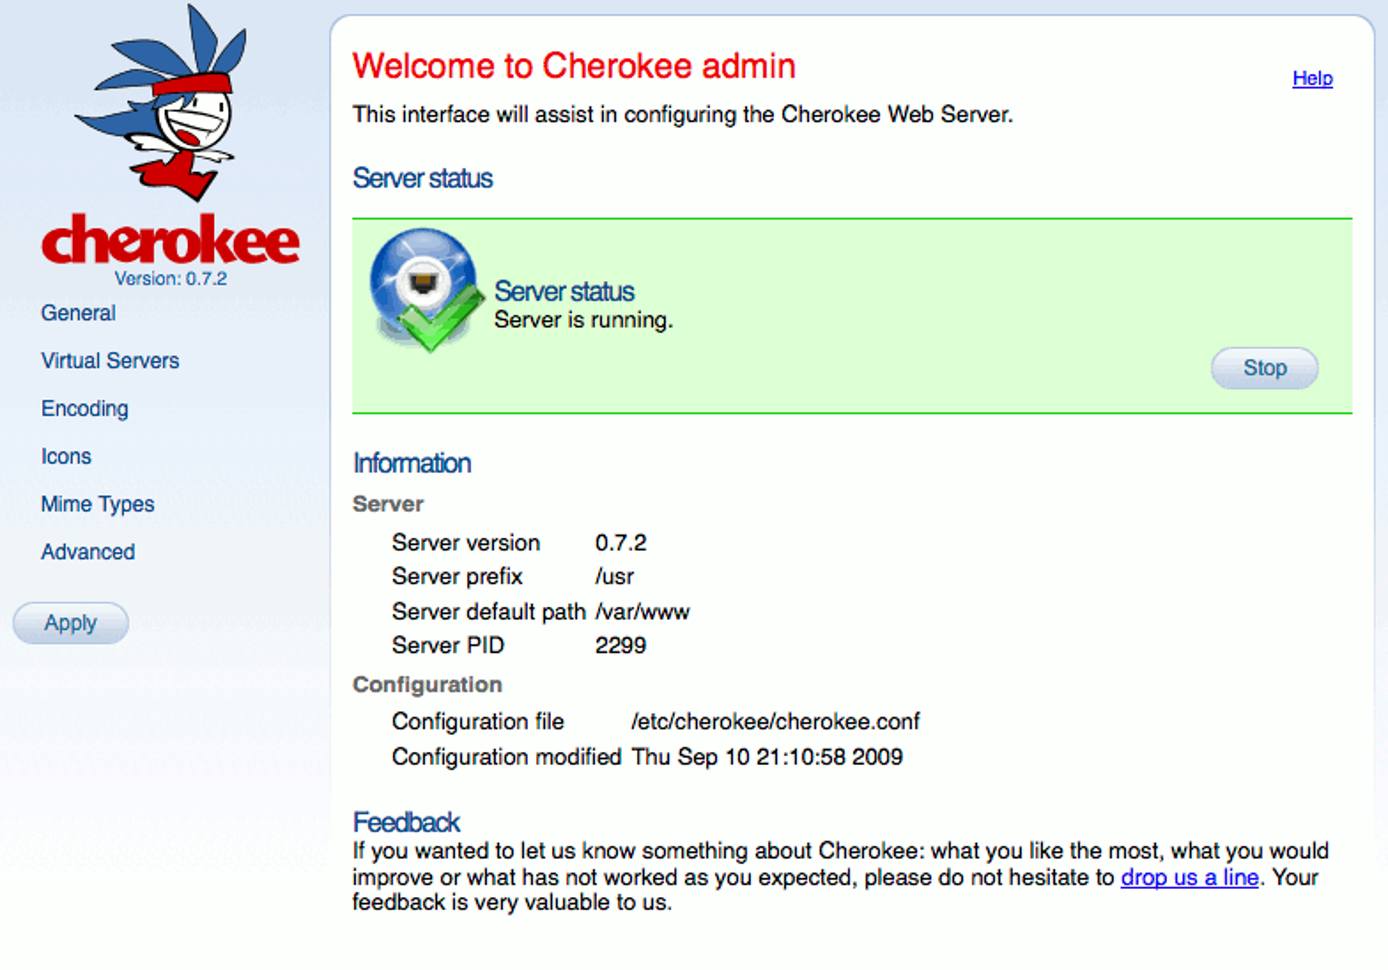 The cherokee-admin web server administration interface running on a Linode.